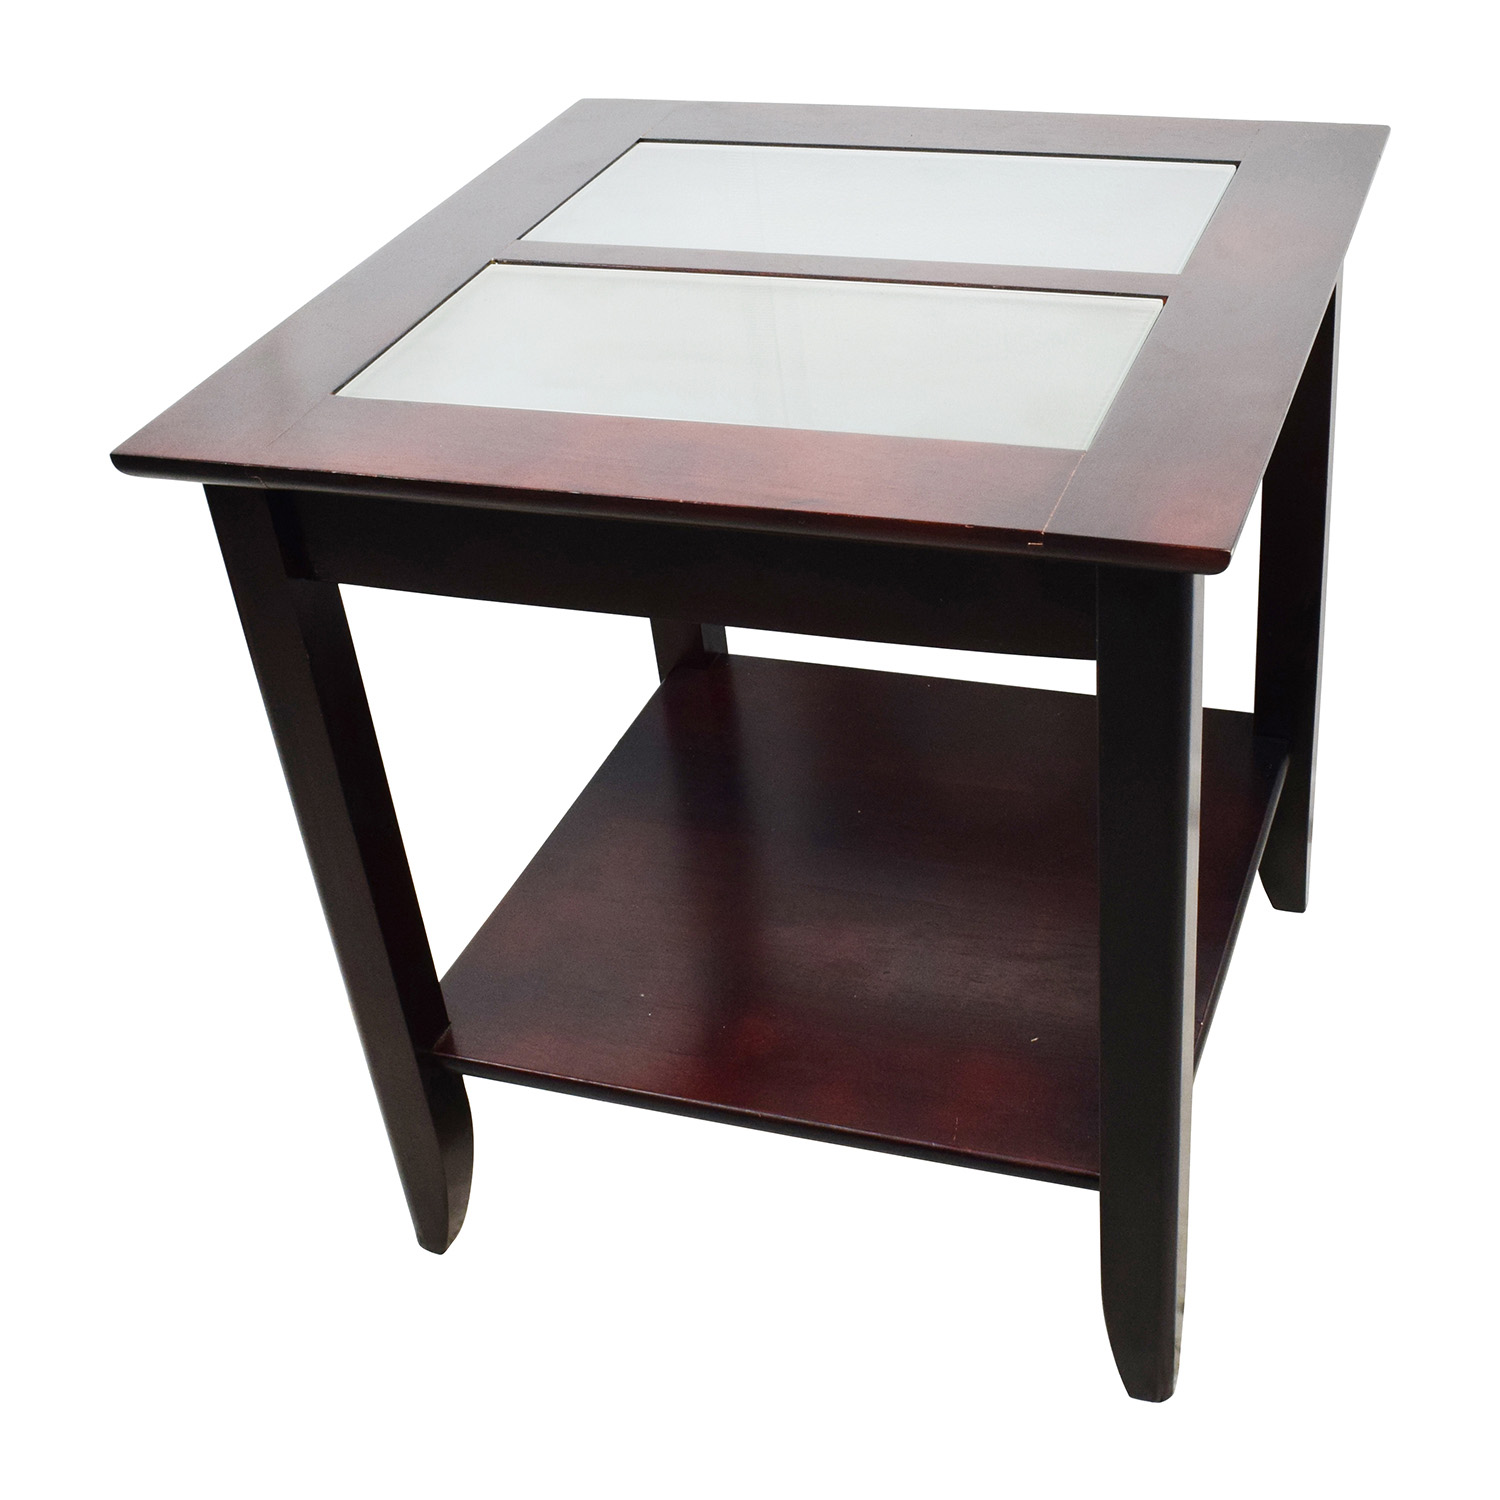 fresh end table target mirror modern side and accent ikea glass wood coffee home lowe good big lot foot threshold parquet kitchen counter pork pie drum throne turkish furniture